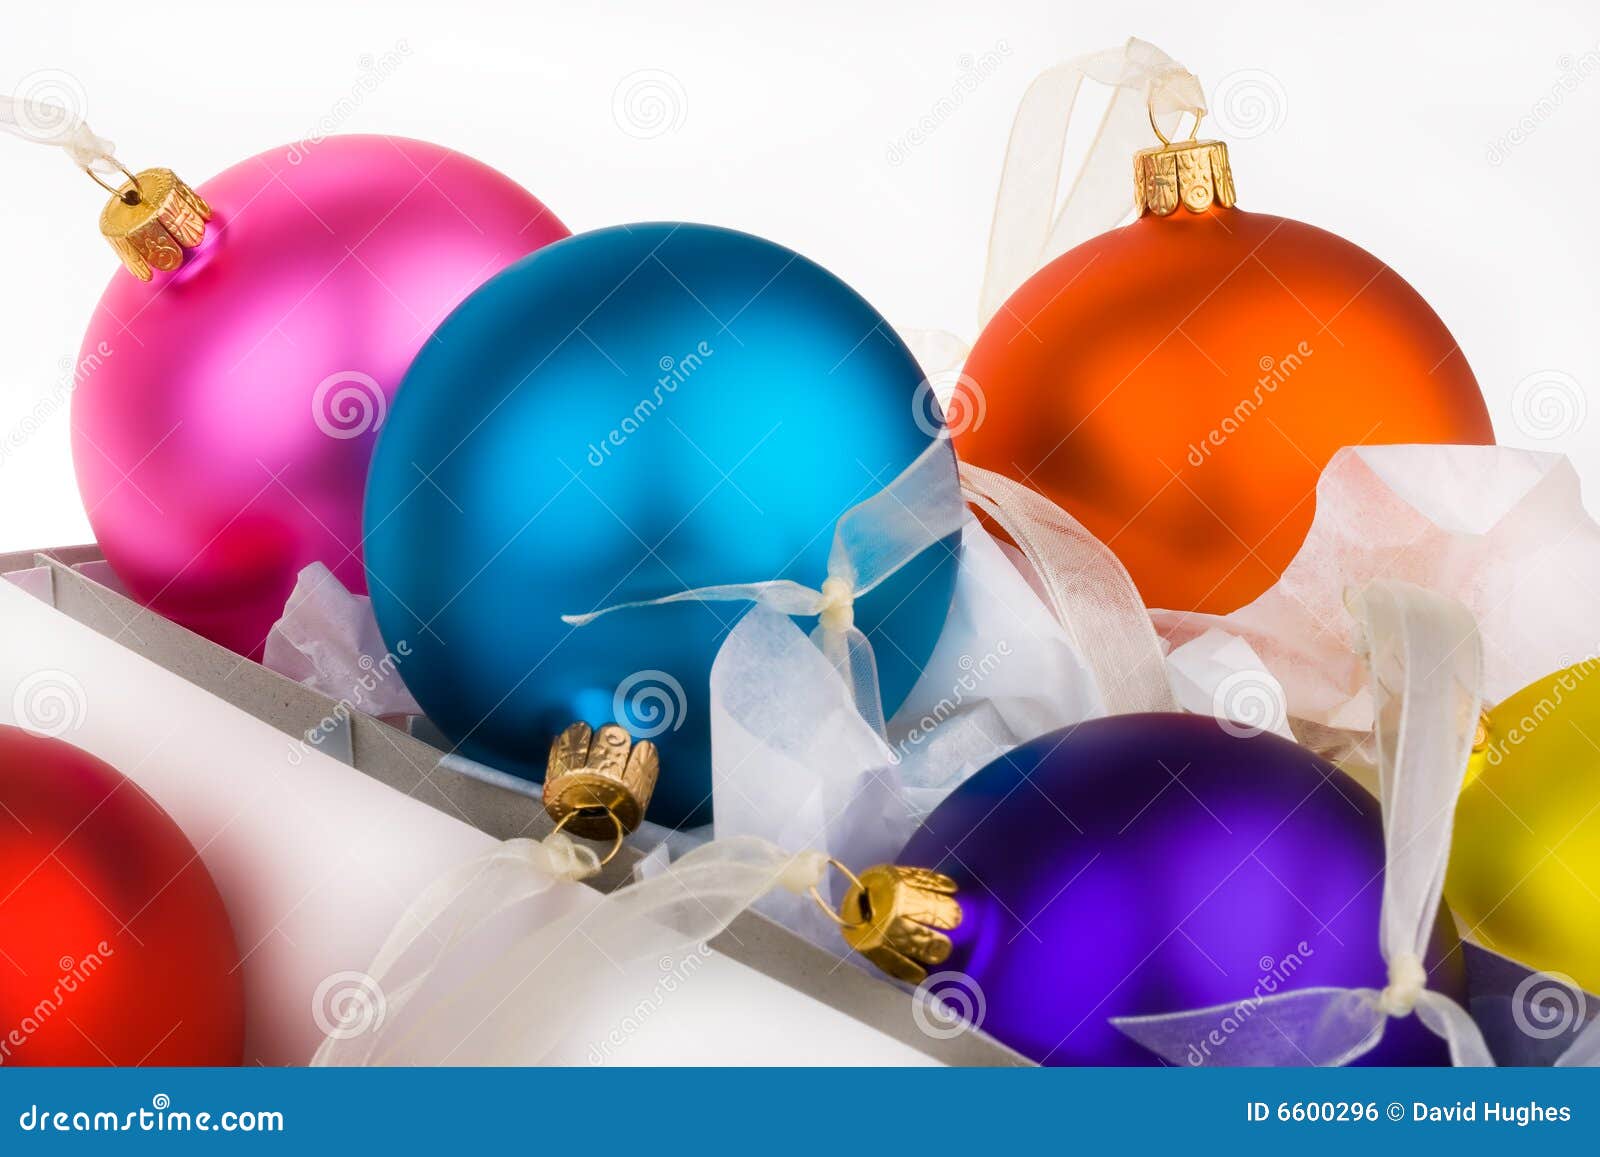 christmas baubles boxed and unboxed